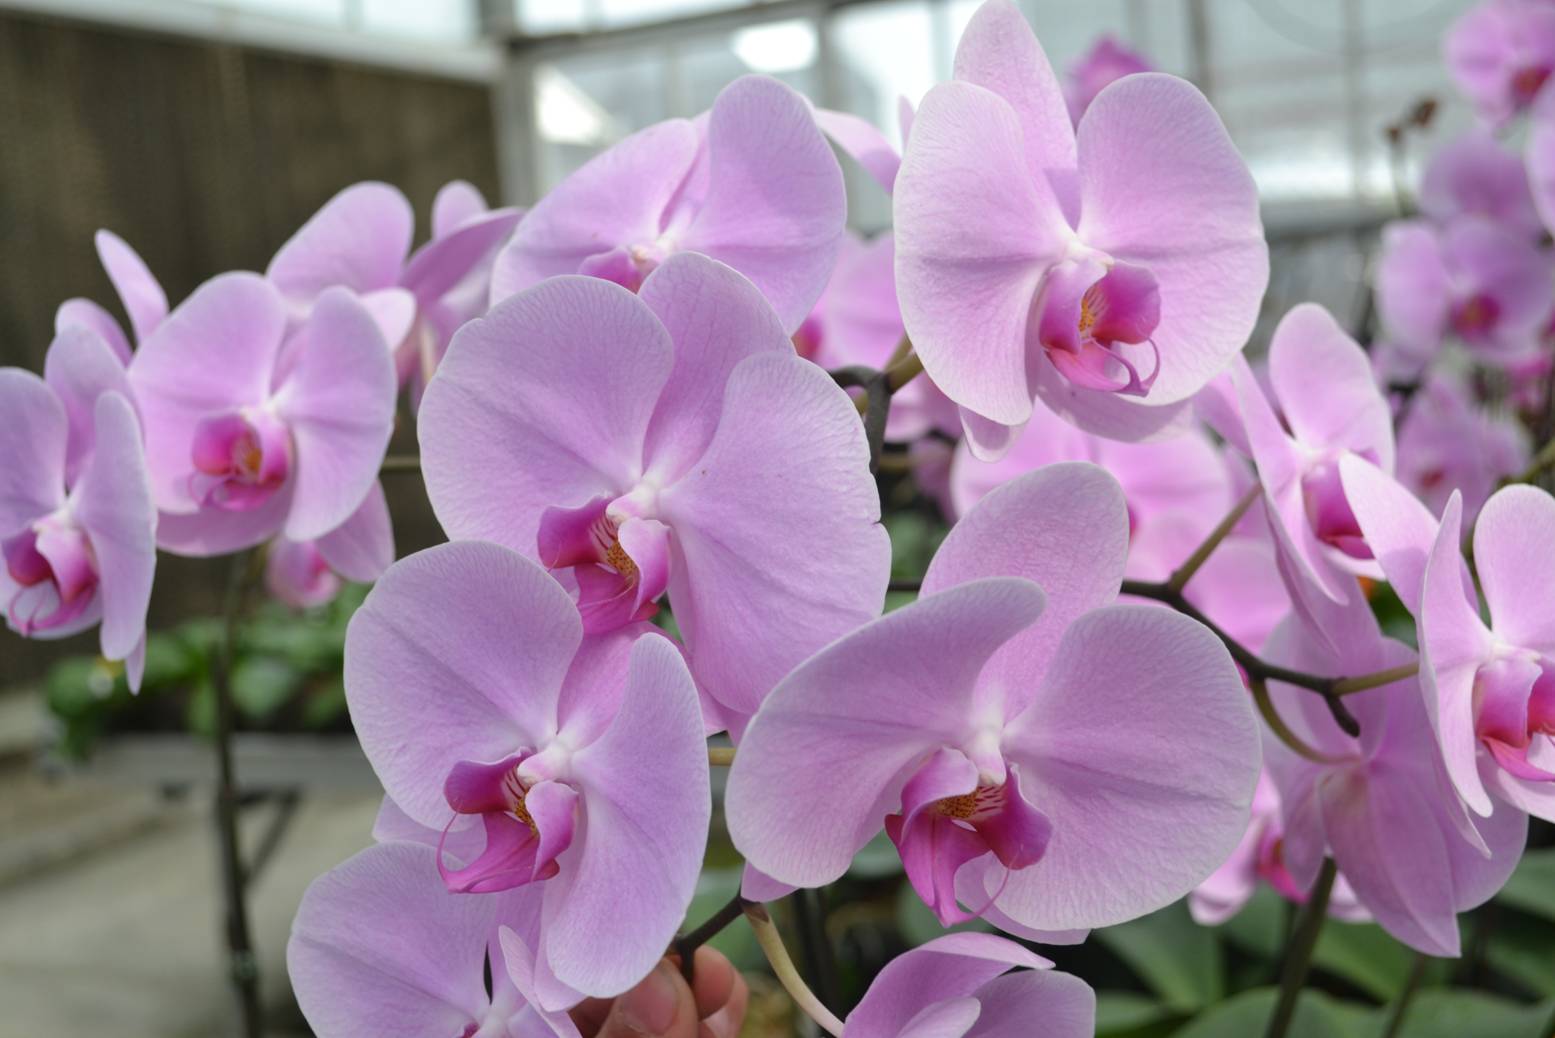 High quality orchids by using the rice straw based growing medium